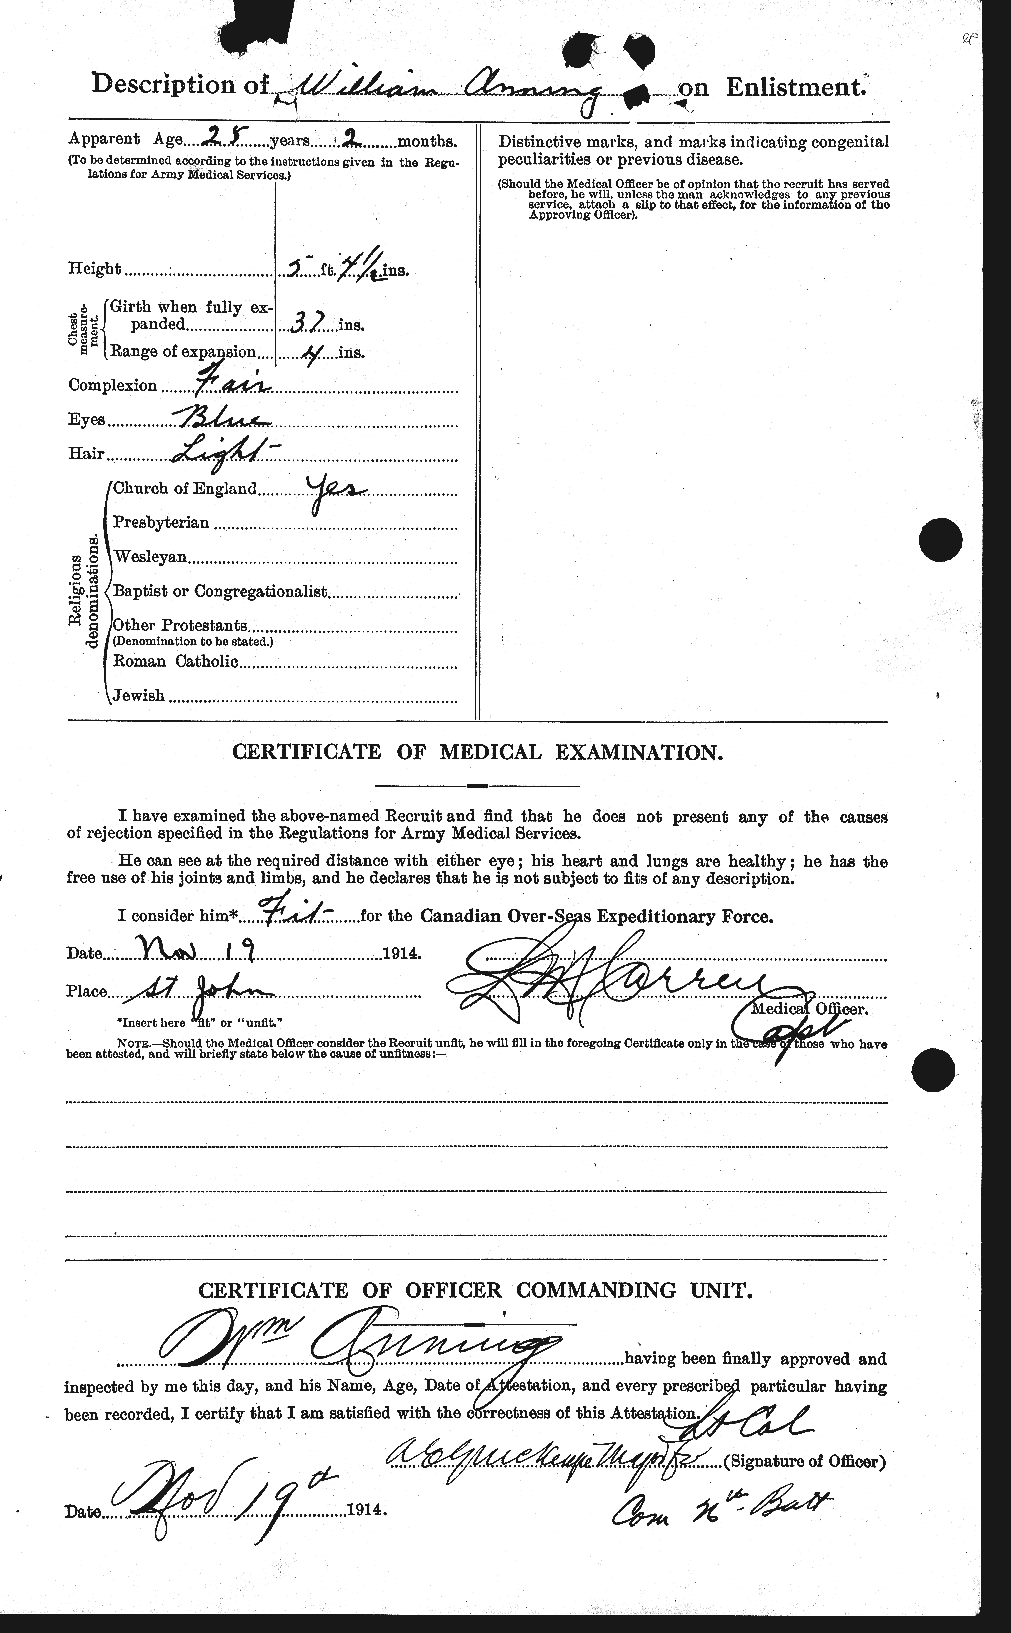 Personnel Records of the First World War - CEF 212422b